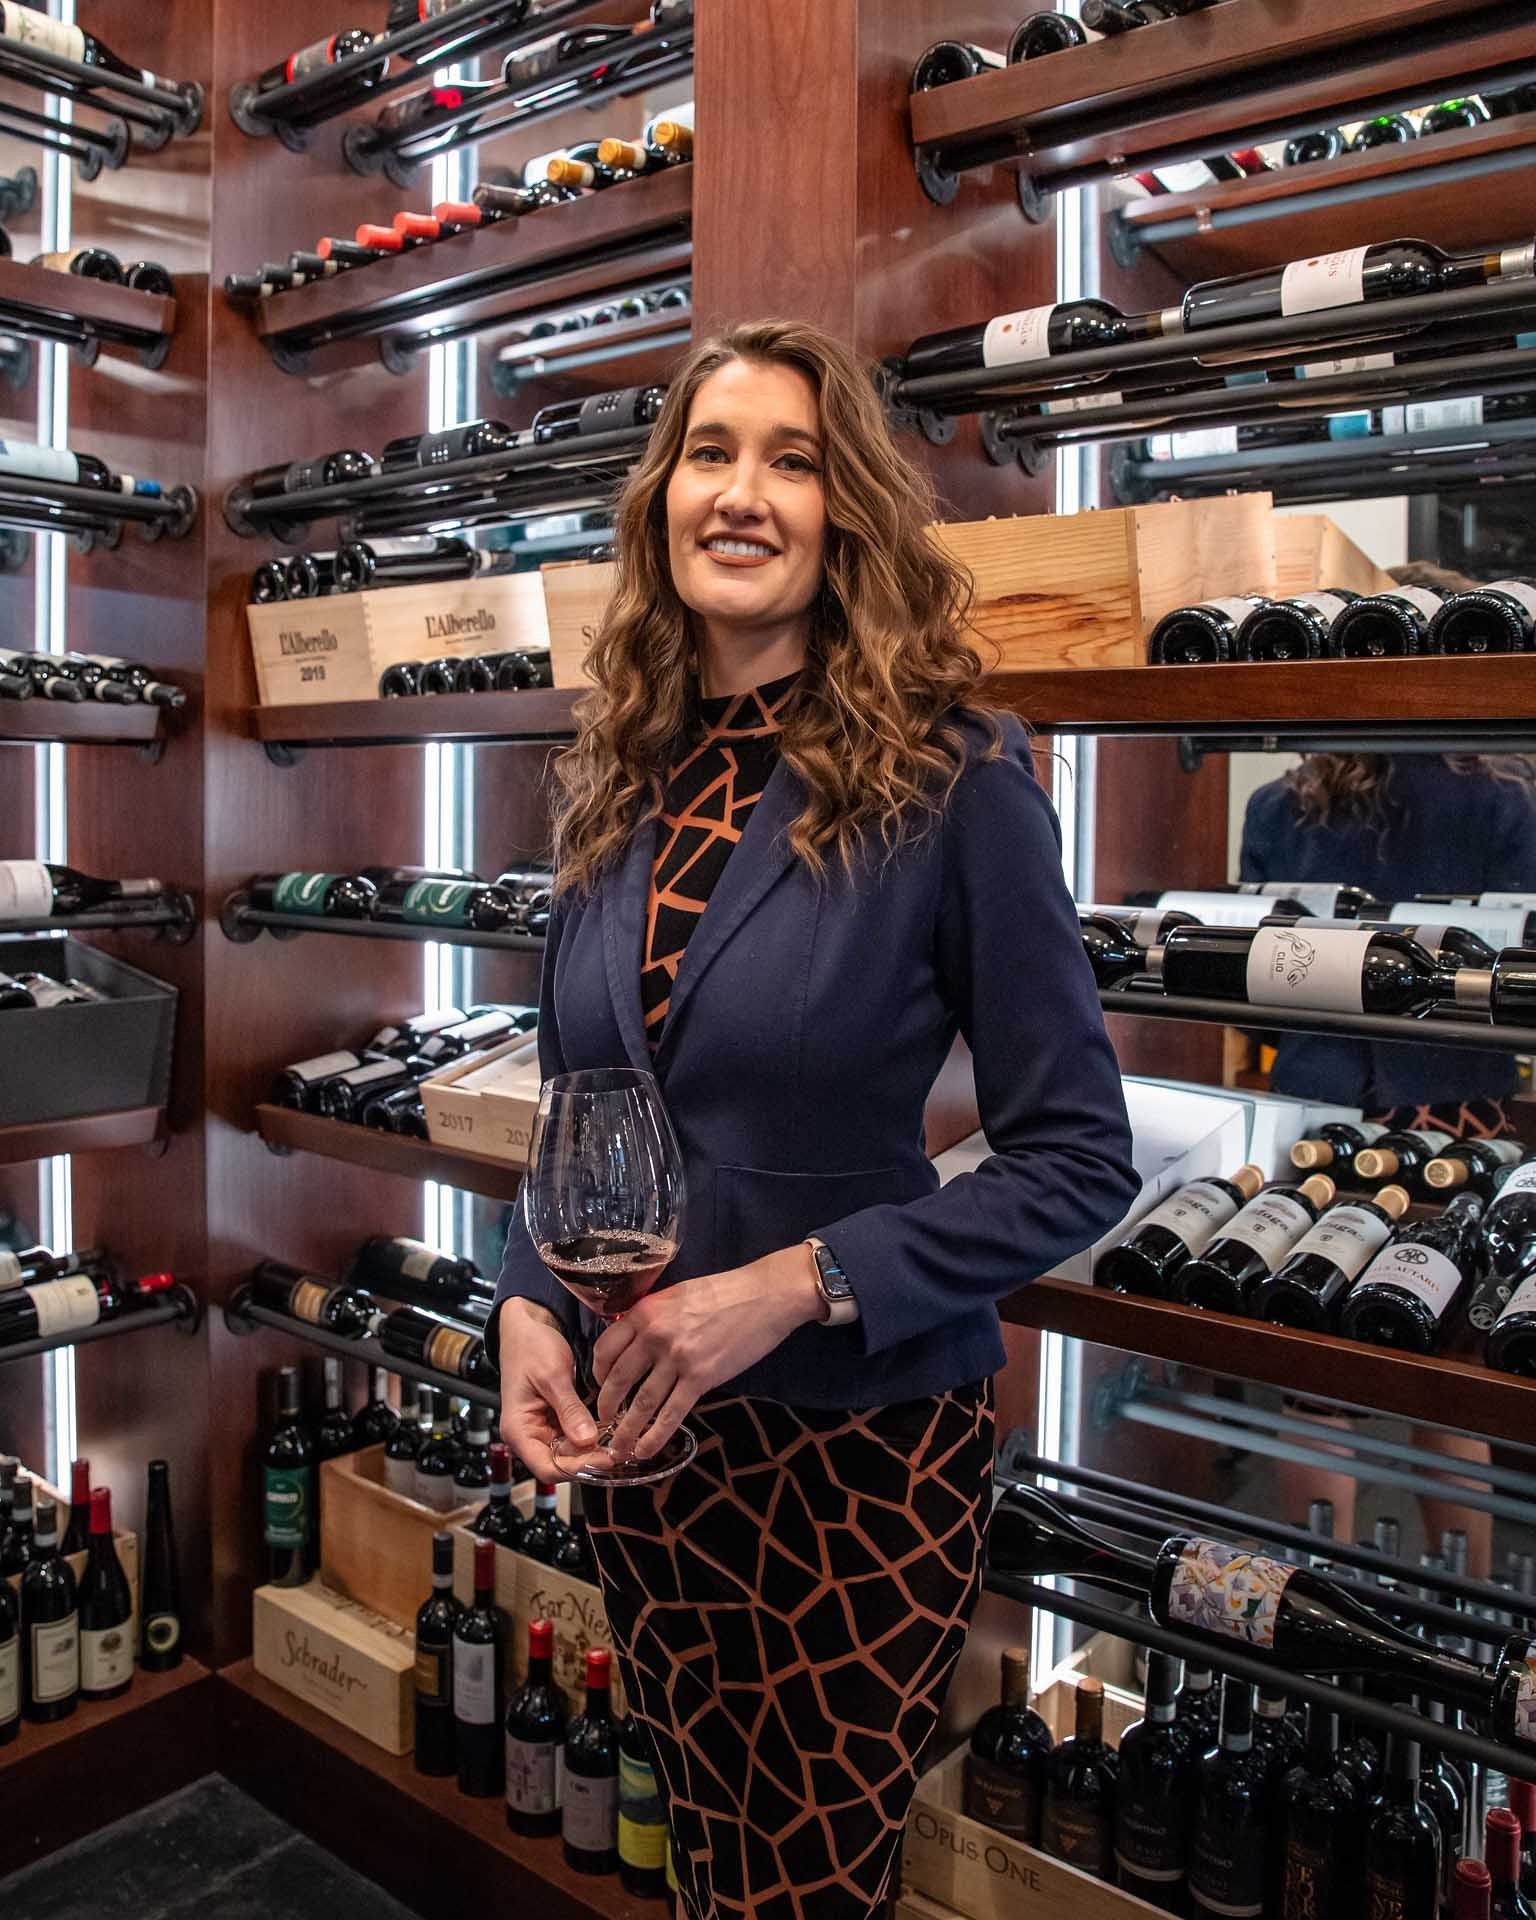 bethany morris holding a glass of wine in front of a wall of wine bottles including a bottle of lagrein